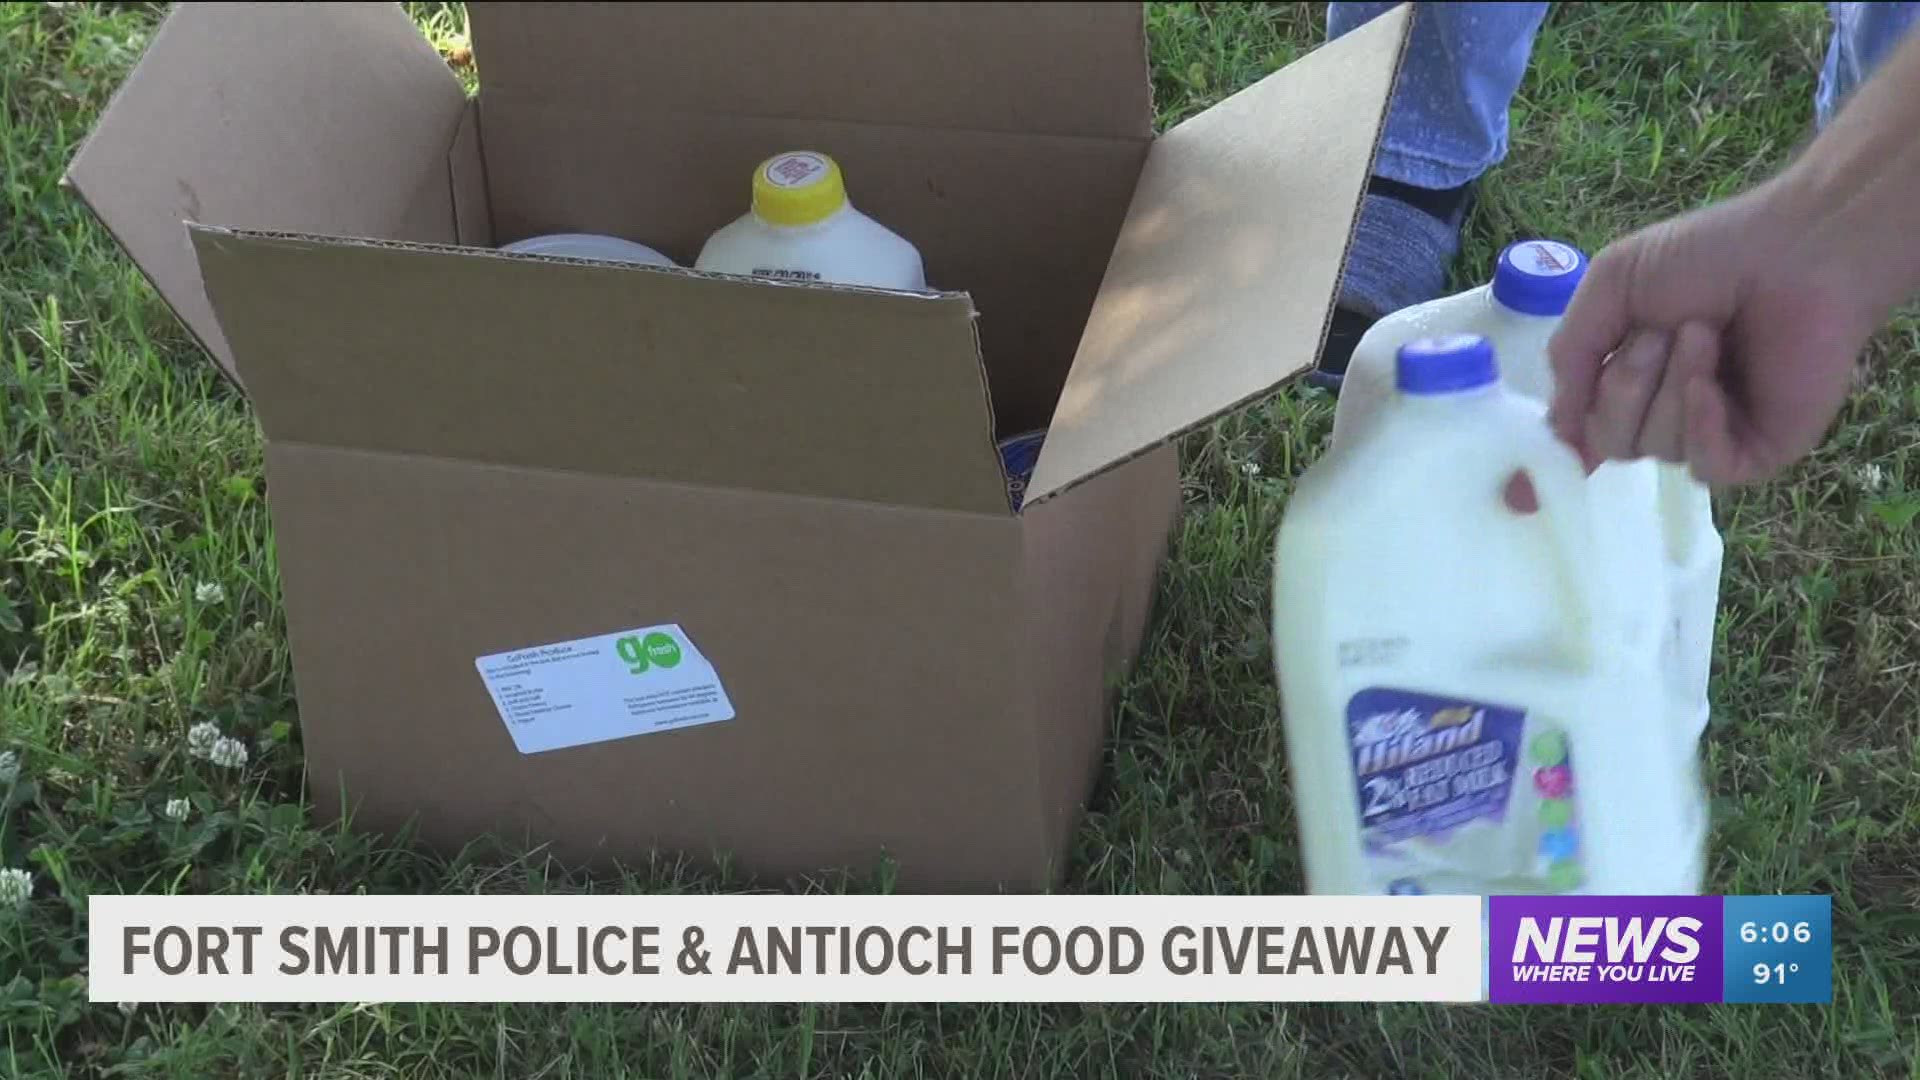 The Fort Smith Police Department partnered with Antioch for Youth and Family to give away $48,000 worth of free food.